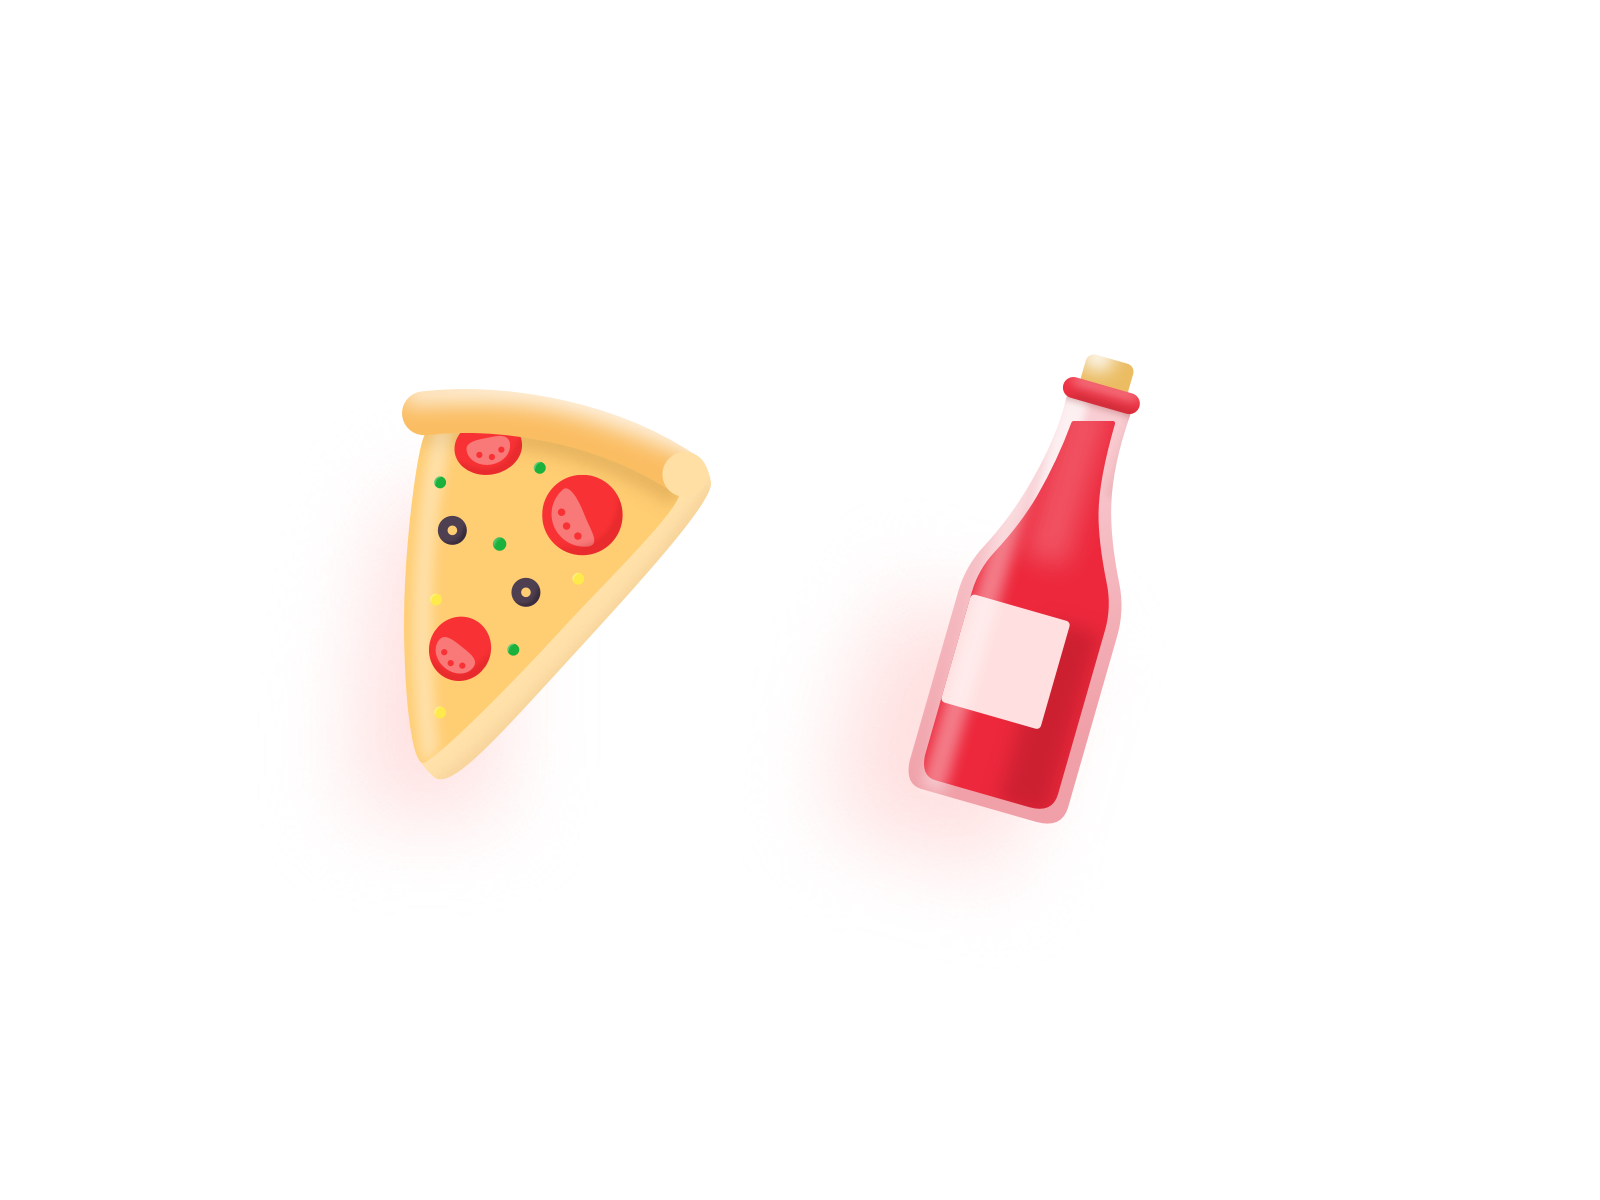 Taste of Italy by Julie Coignoux for Tymate on Dribbble